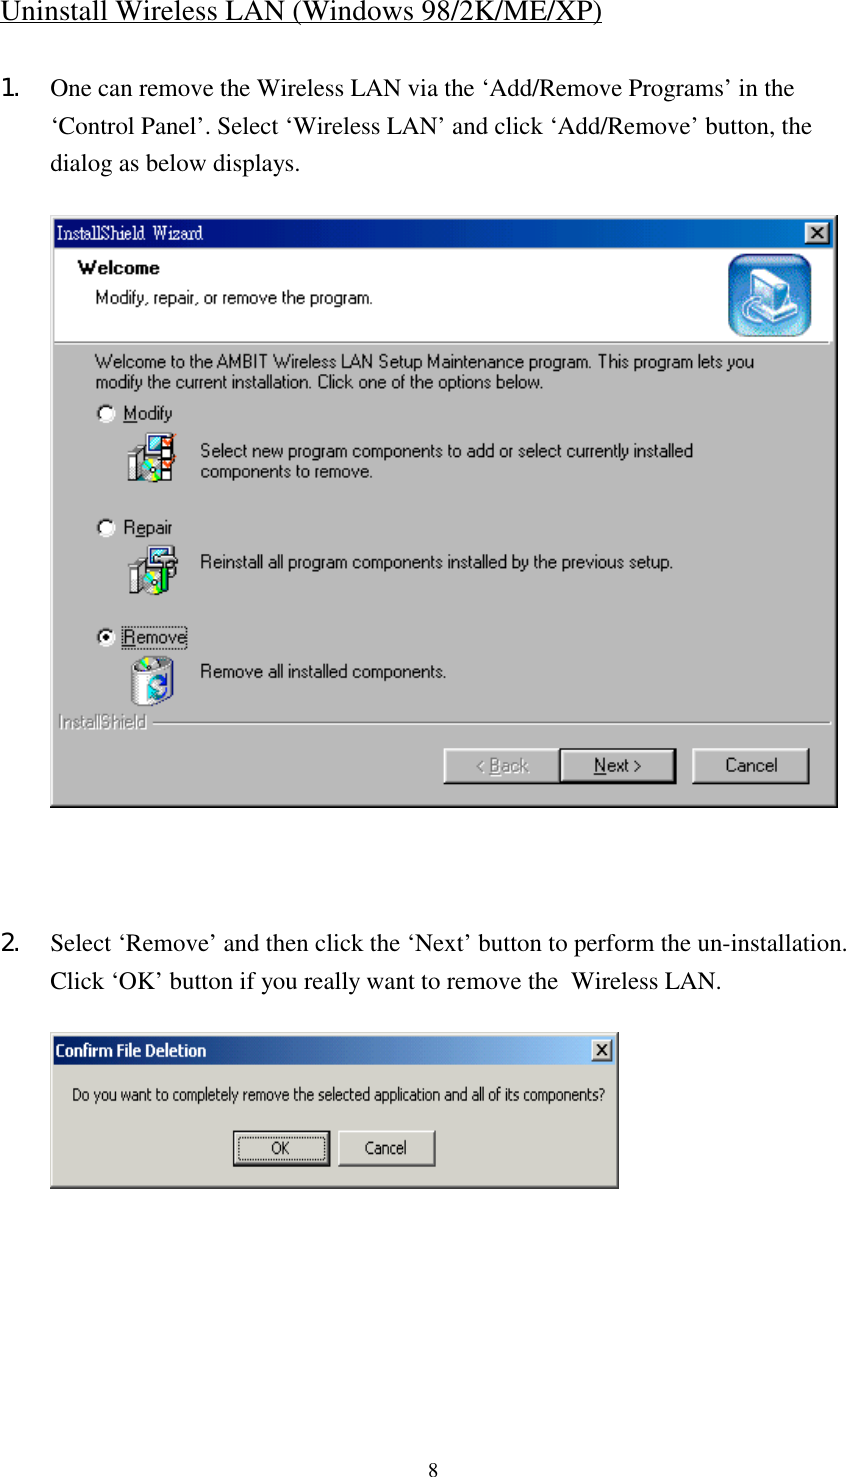 8Uninstall Wireless LAN (Windows 98/2K/ME/XP)1. One can remove the Wireless LAN via the ‘Add/Remove Programs’ in the‘Control Panel’. Select ‘Wireless LAN’ and click ‘Add/Remove’ button, thedialog as below displays.2. Select ‘Remove’ and then click the ‘Next’ button to perform the un-installation.Click ‘OK’ button if you really want to remove the  Wireless LAN.